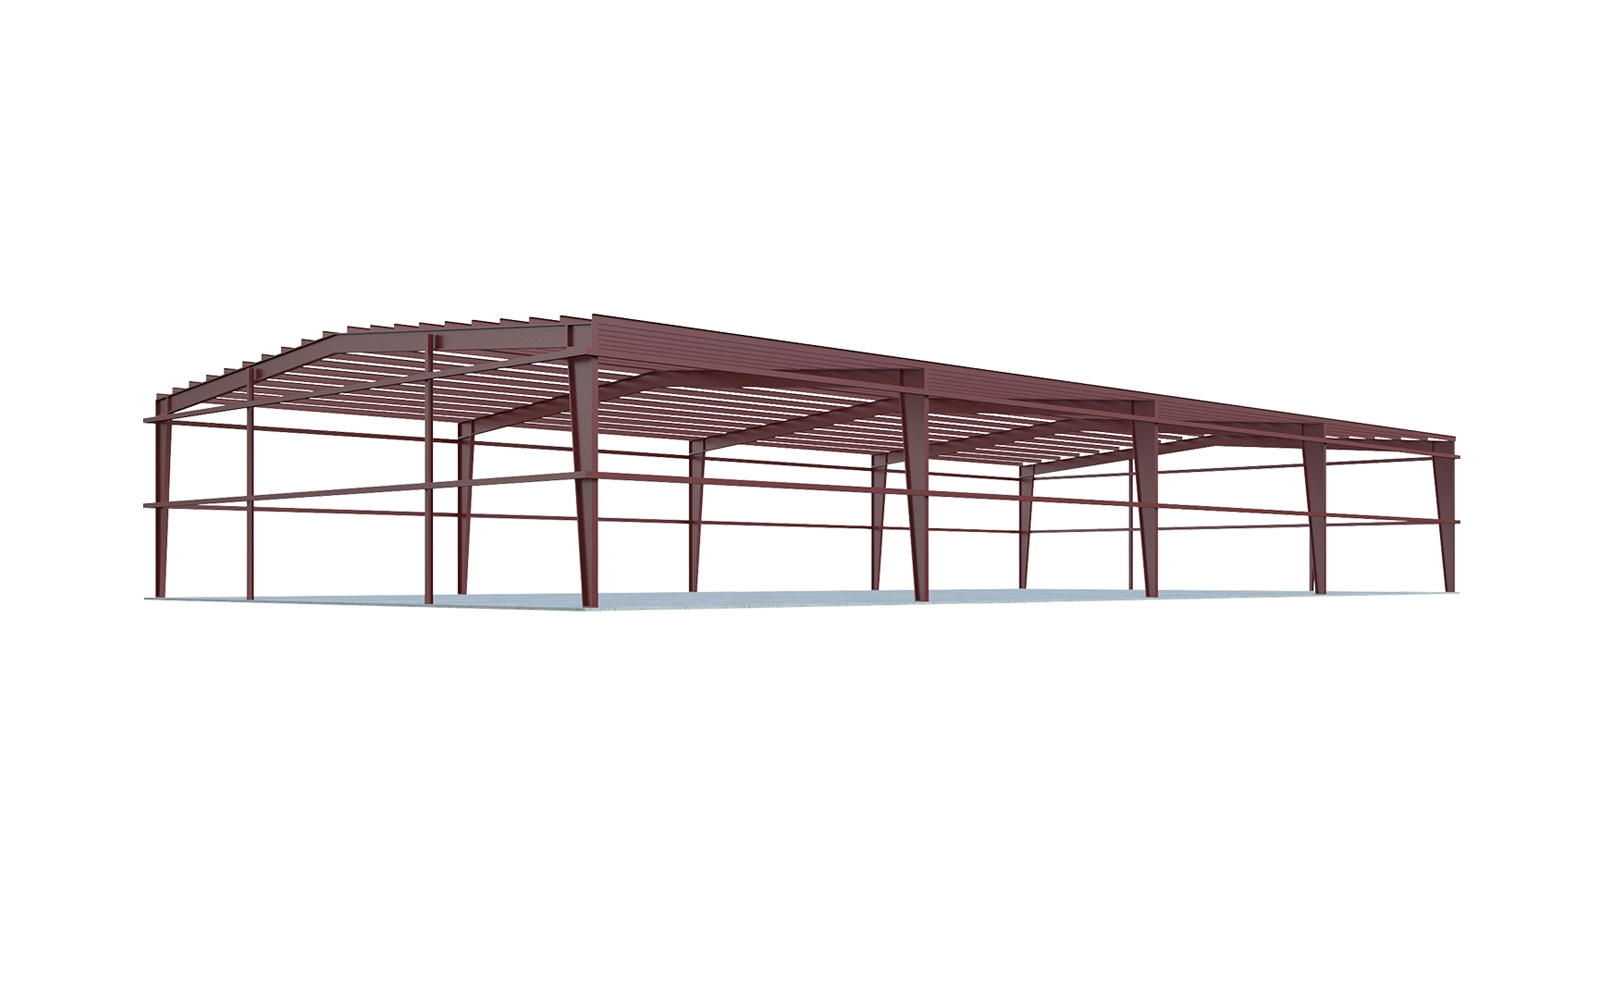 40x80 Metal Building Packages: Quick Prices | General Steel